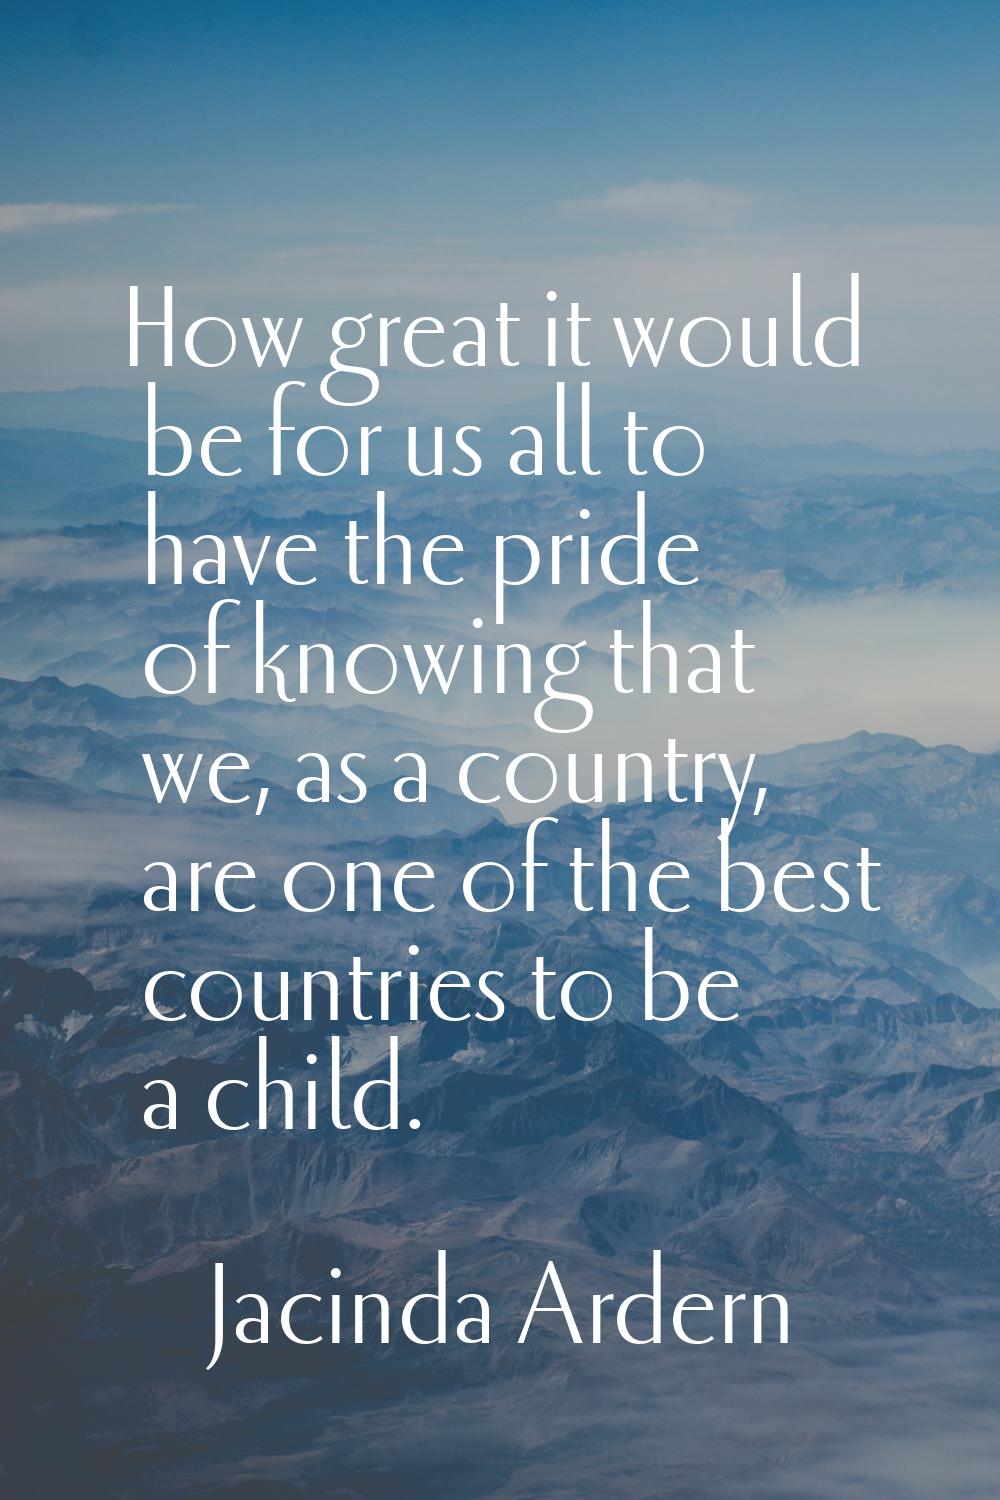 How great it would be for us all to have the pride of knowing that we, as a country, are one of the